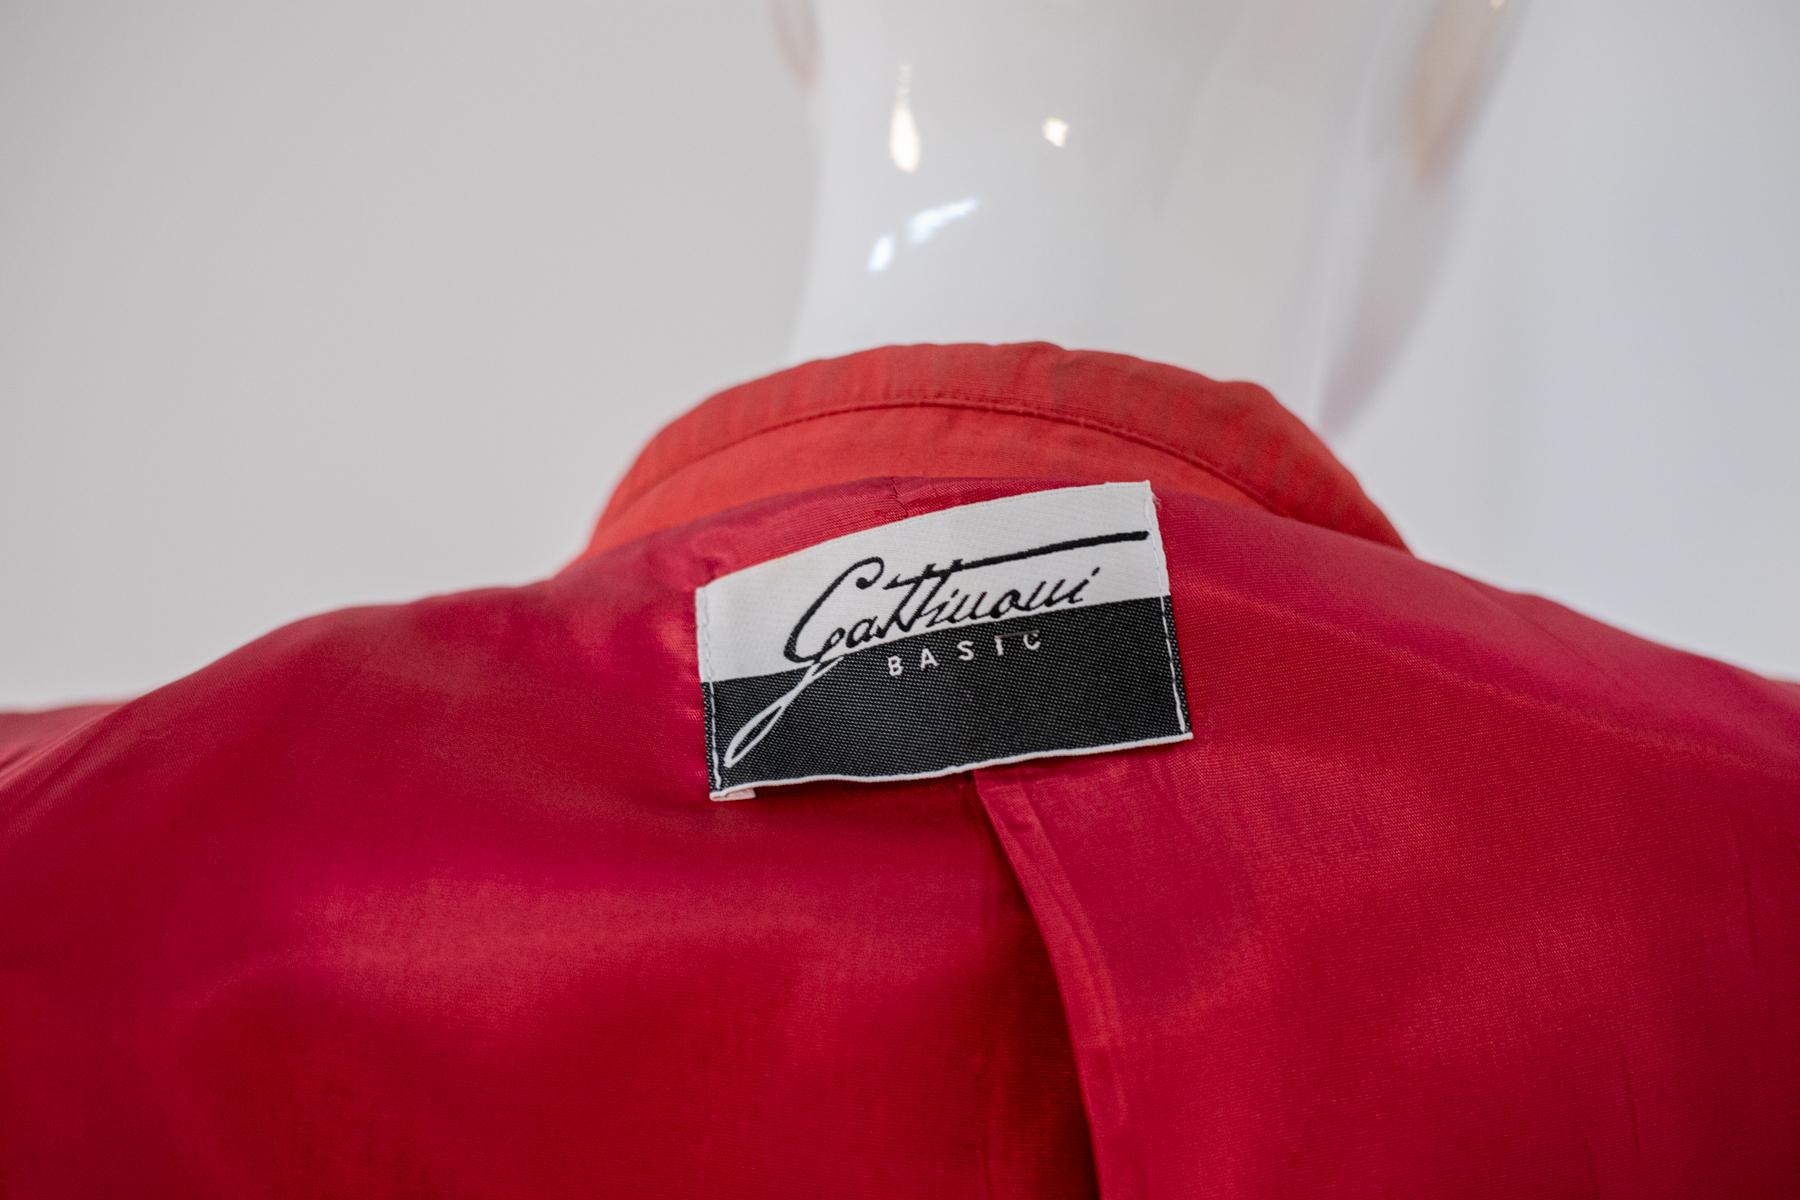 Charming vintage red blazer designed by Gattinoni in the 1980s, made in Italy.
The blazer is totally made of bright red acetate, with short, wide sleeves that allow nice arm movement. The collar has the classic standard stand-up cut, beautiful but